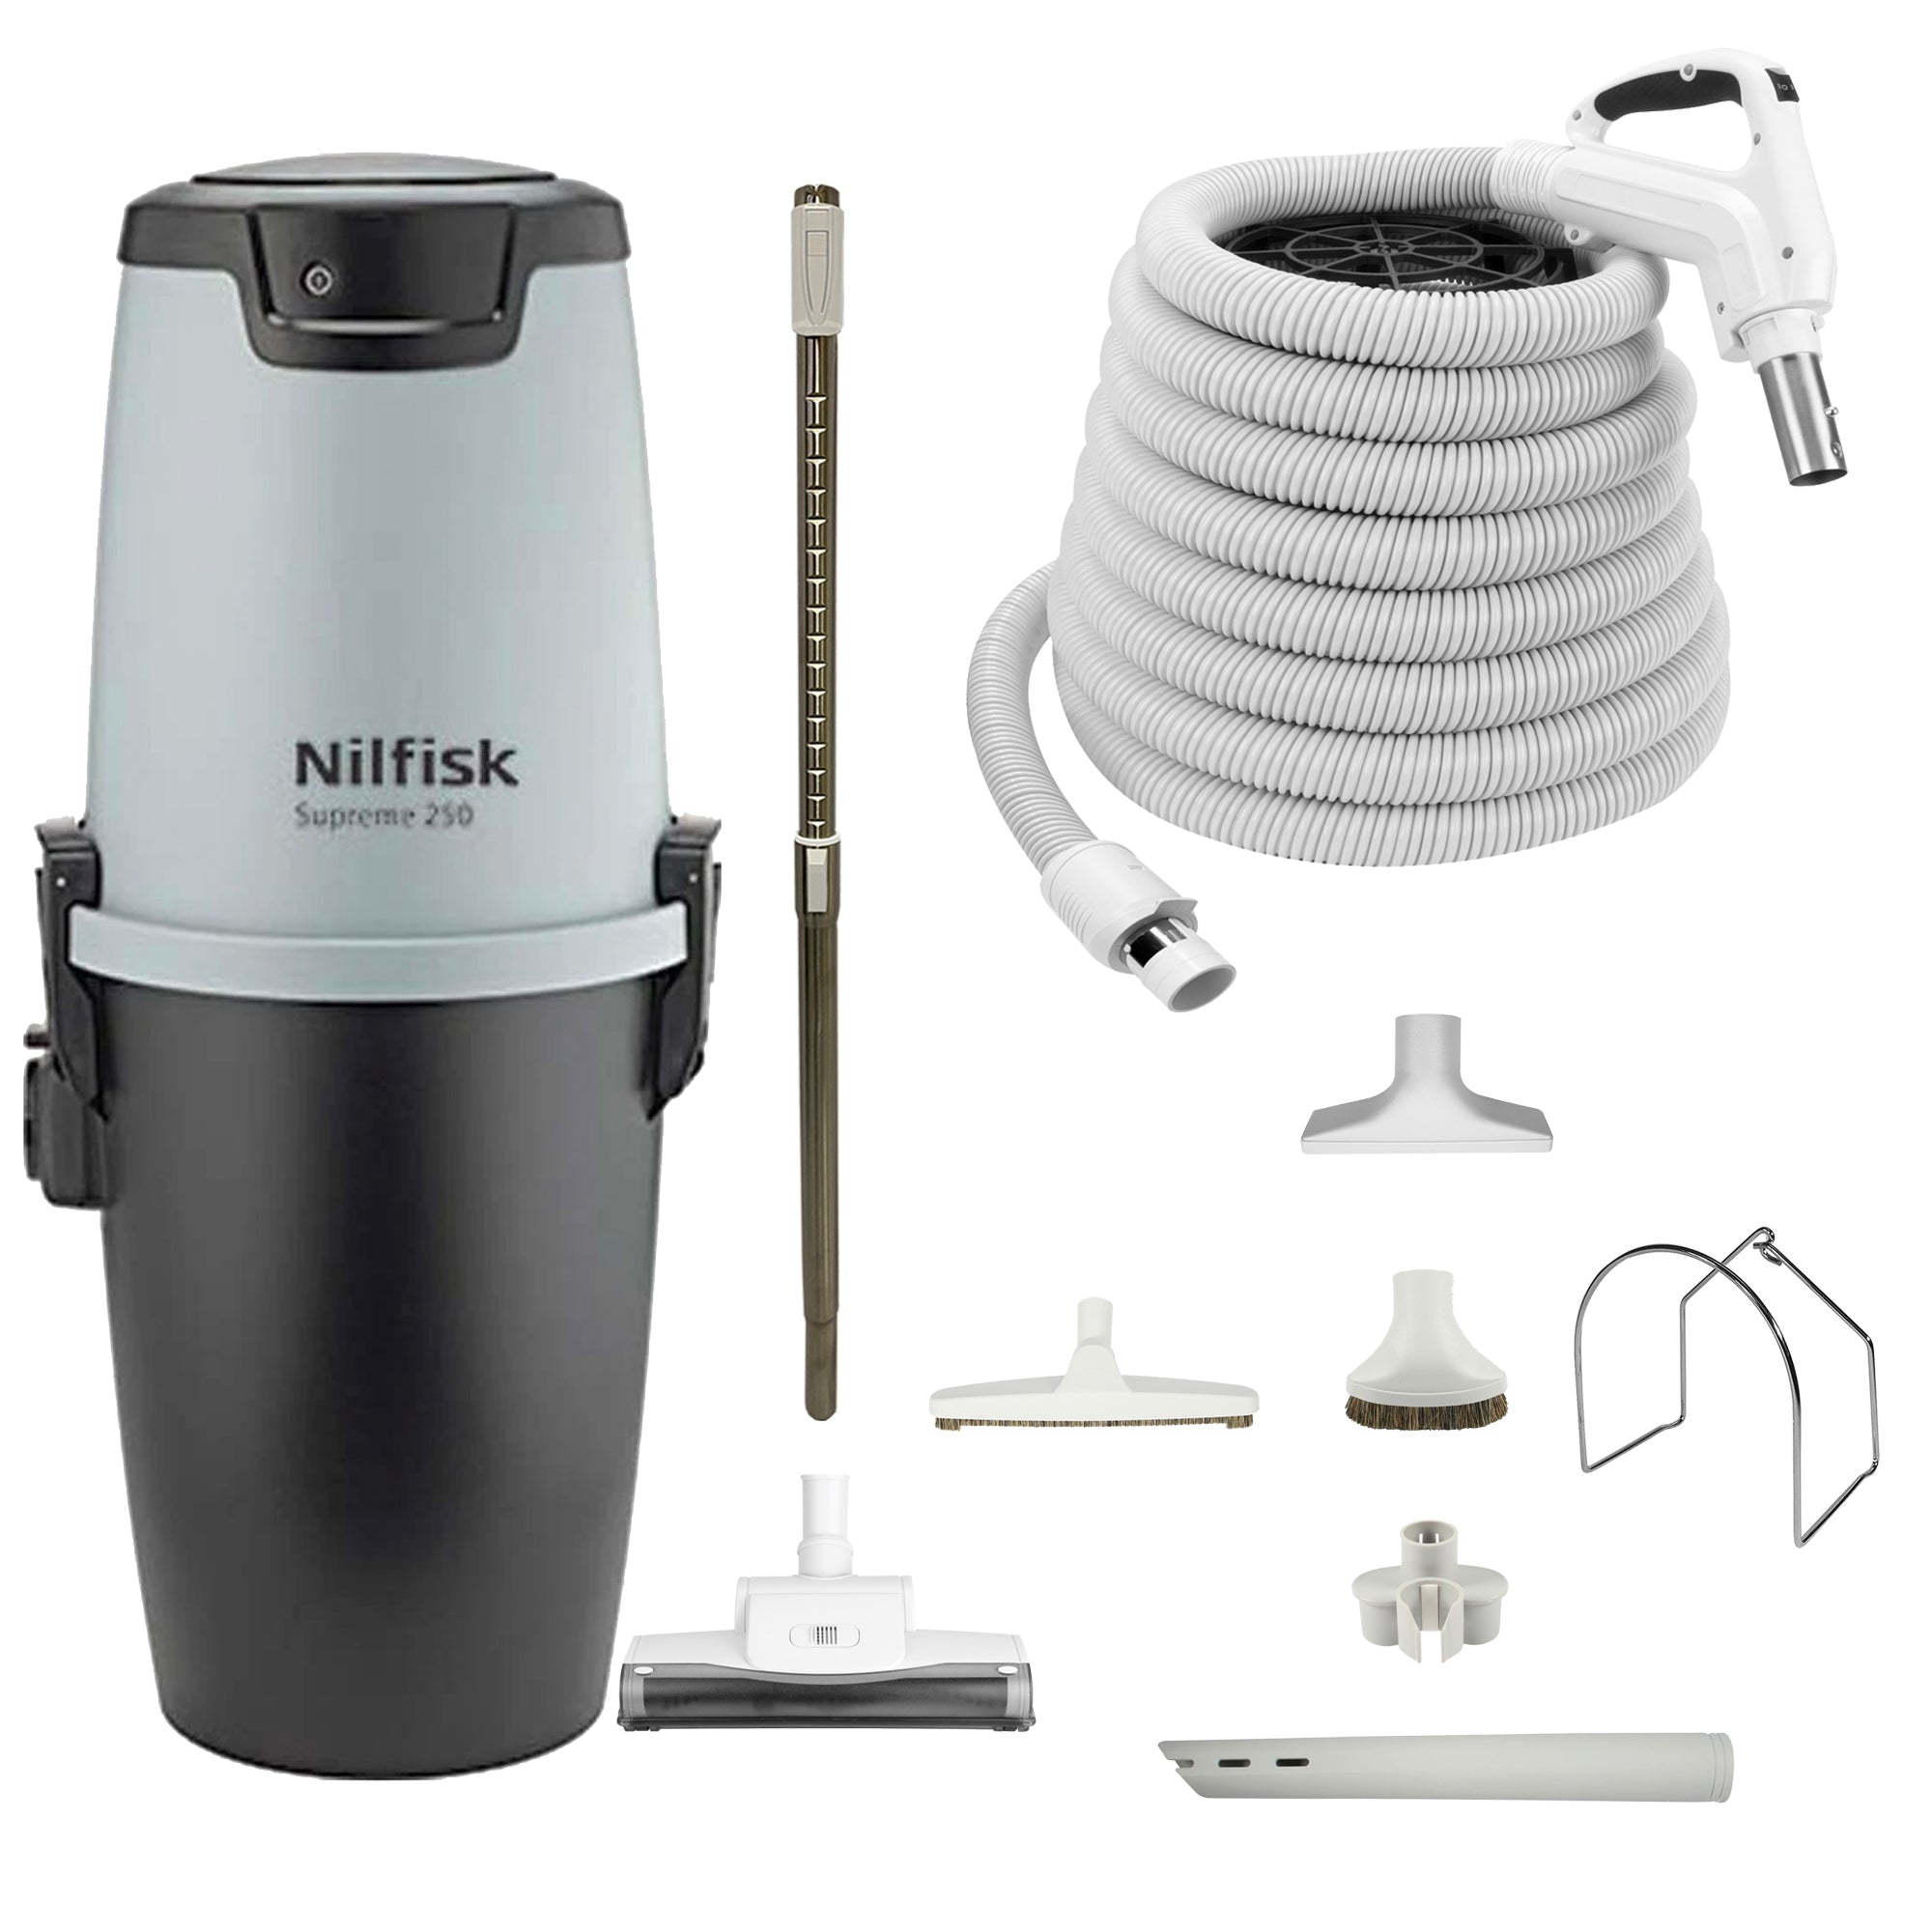 Nilfisk Supreme 250 Central Vacuum Cleaner with Standard Air Package - White